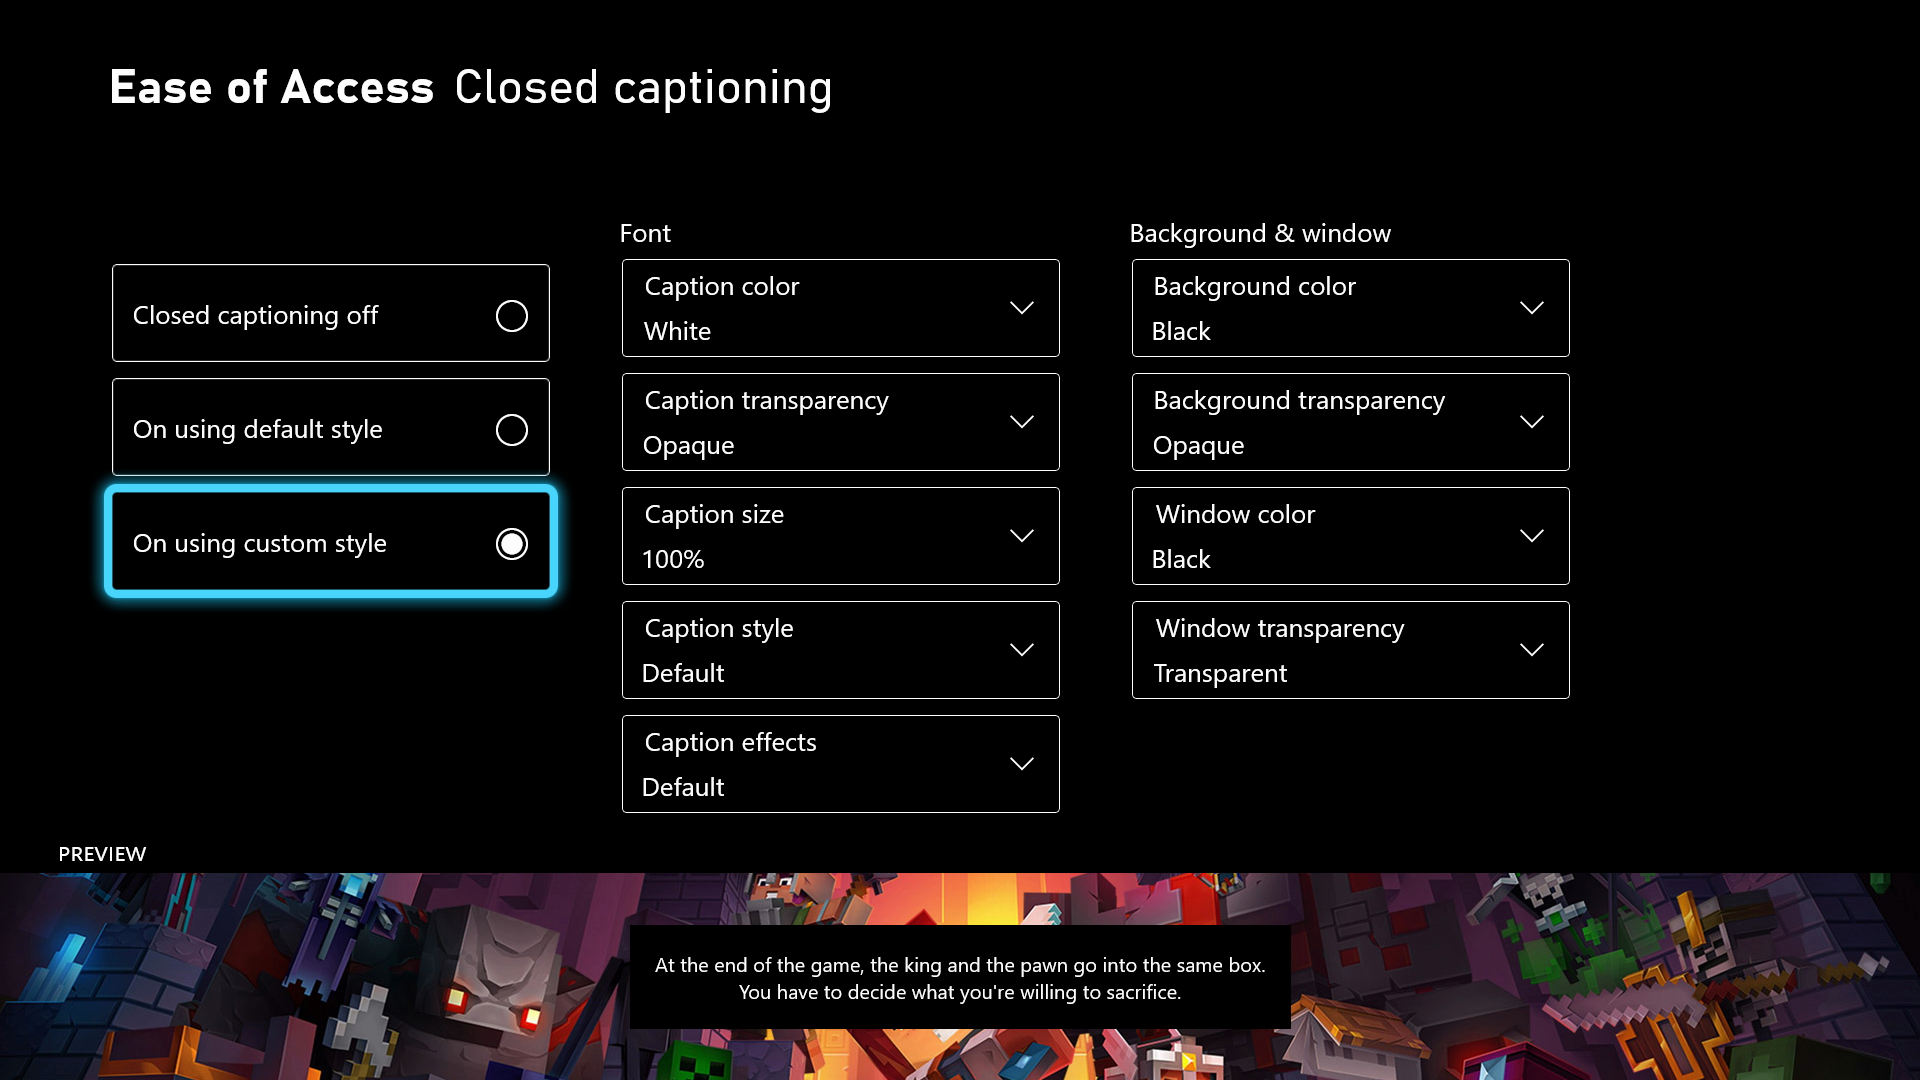 The Xbox console's Ease of Access Closed Captioning settings. The player can turn closed captioning off, on by using the default style, or on by using custom style. The player uses the custom style to change the font color, size, style, and transparency, as well as the background, window color, and transparency. 